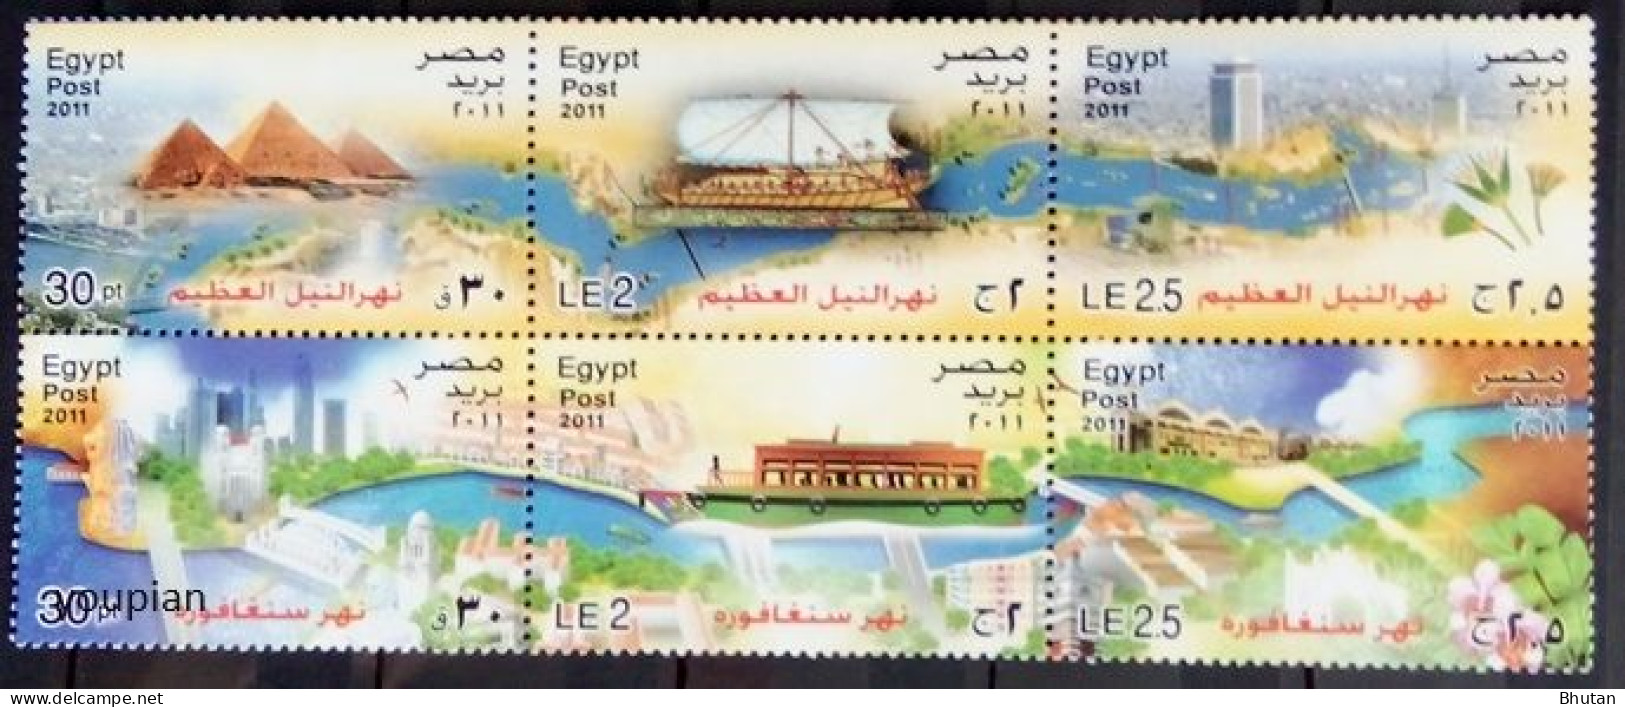 Egypt 2011, Joint Issue With Singapore - River Of Both, Ships & Landmarks Of Egypt, MNH S/S - Unused Stamps